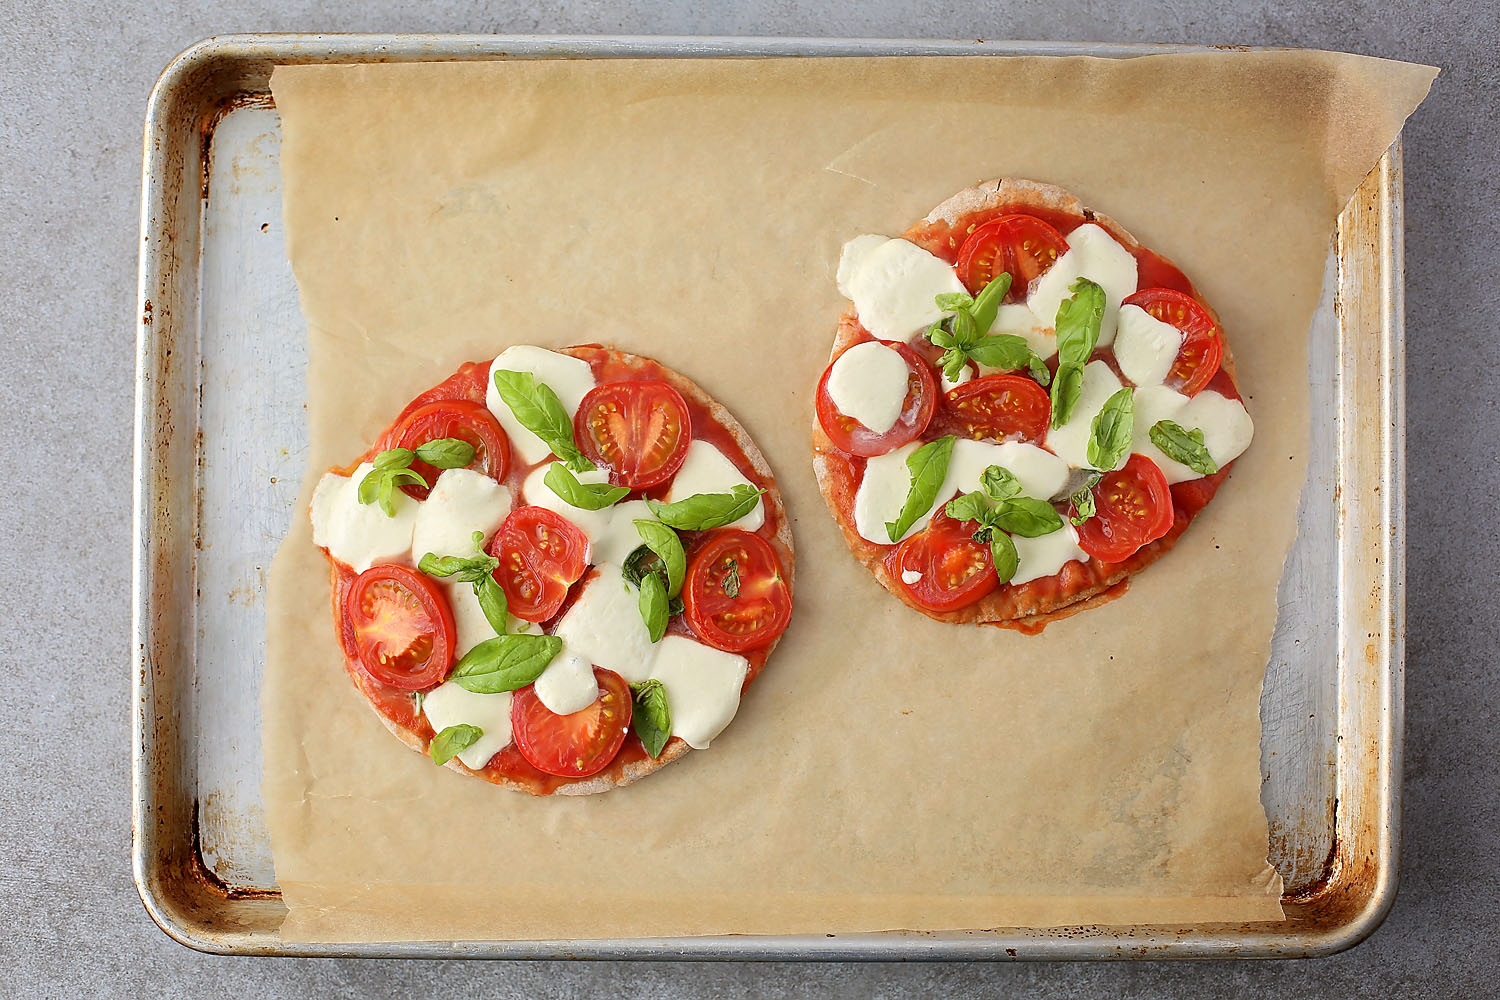 freshly baked Pita Pizza (10-minute pizza) on a baking sheet